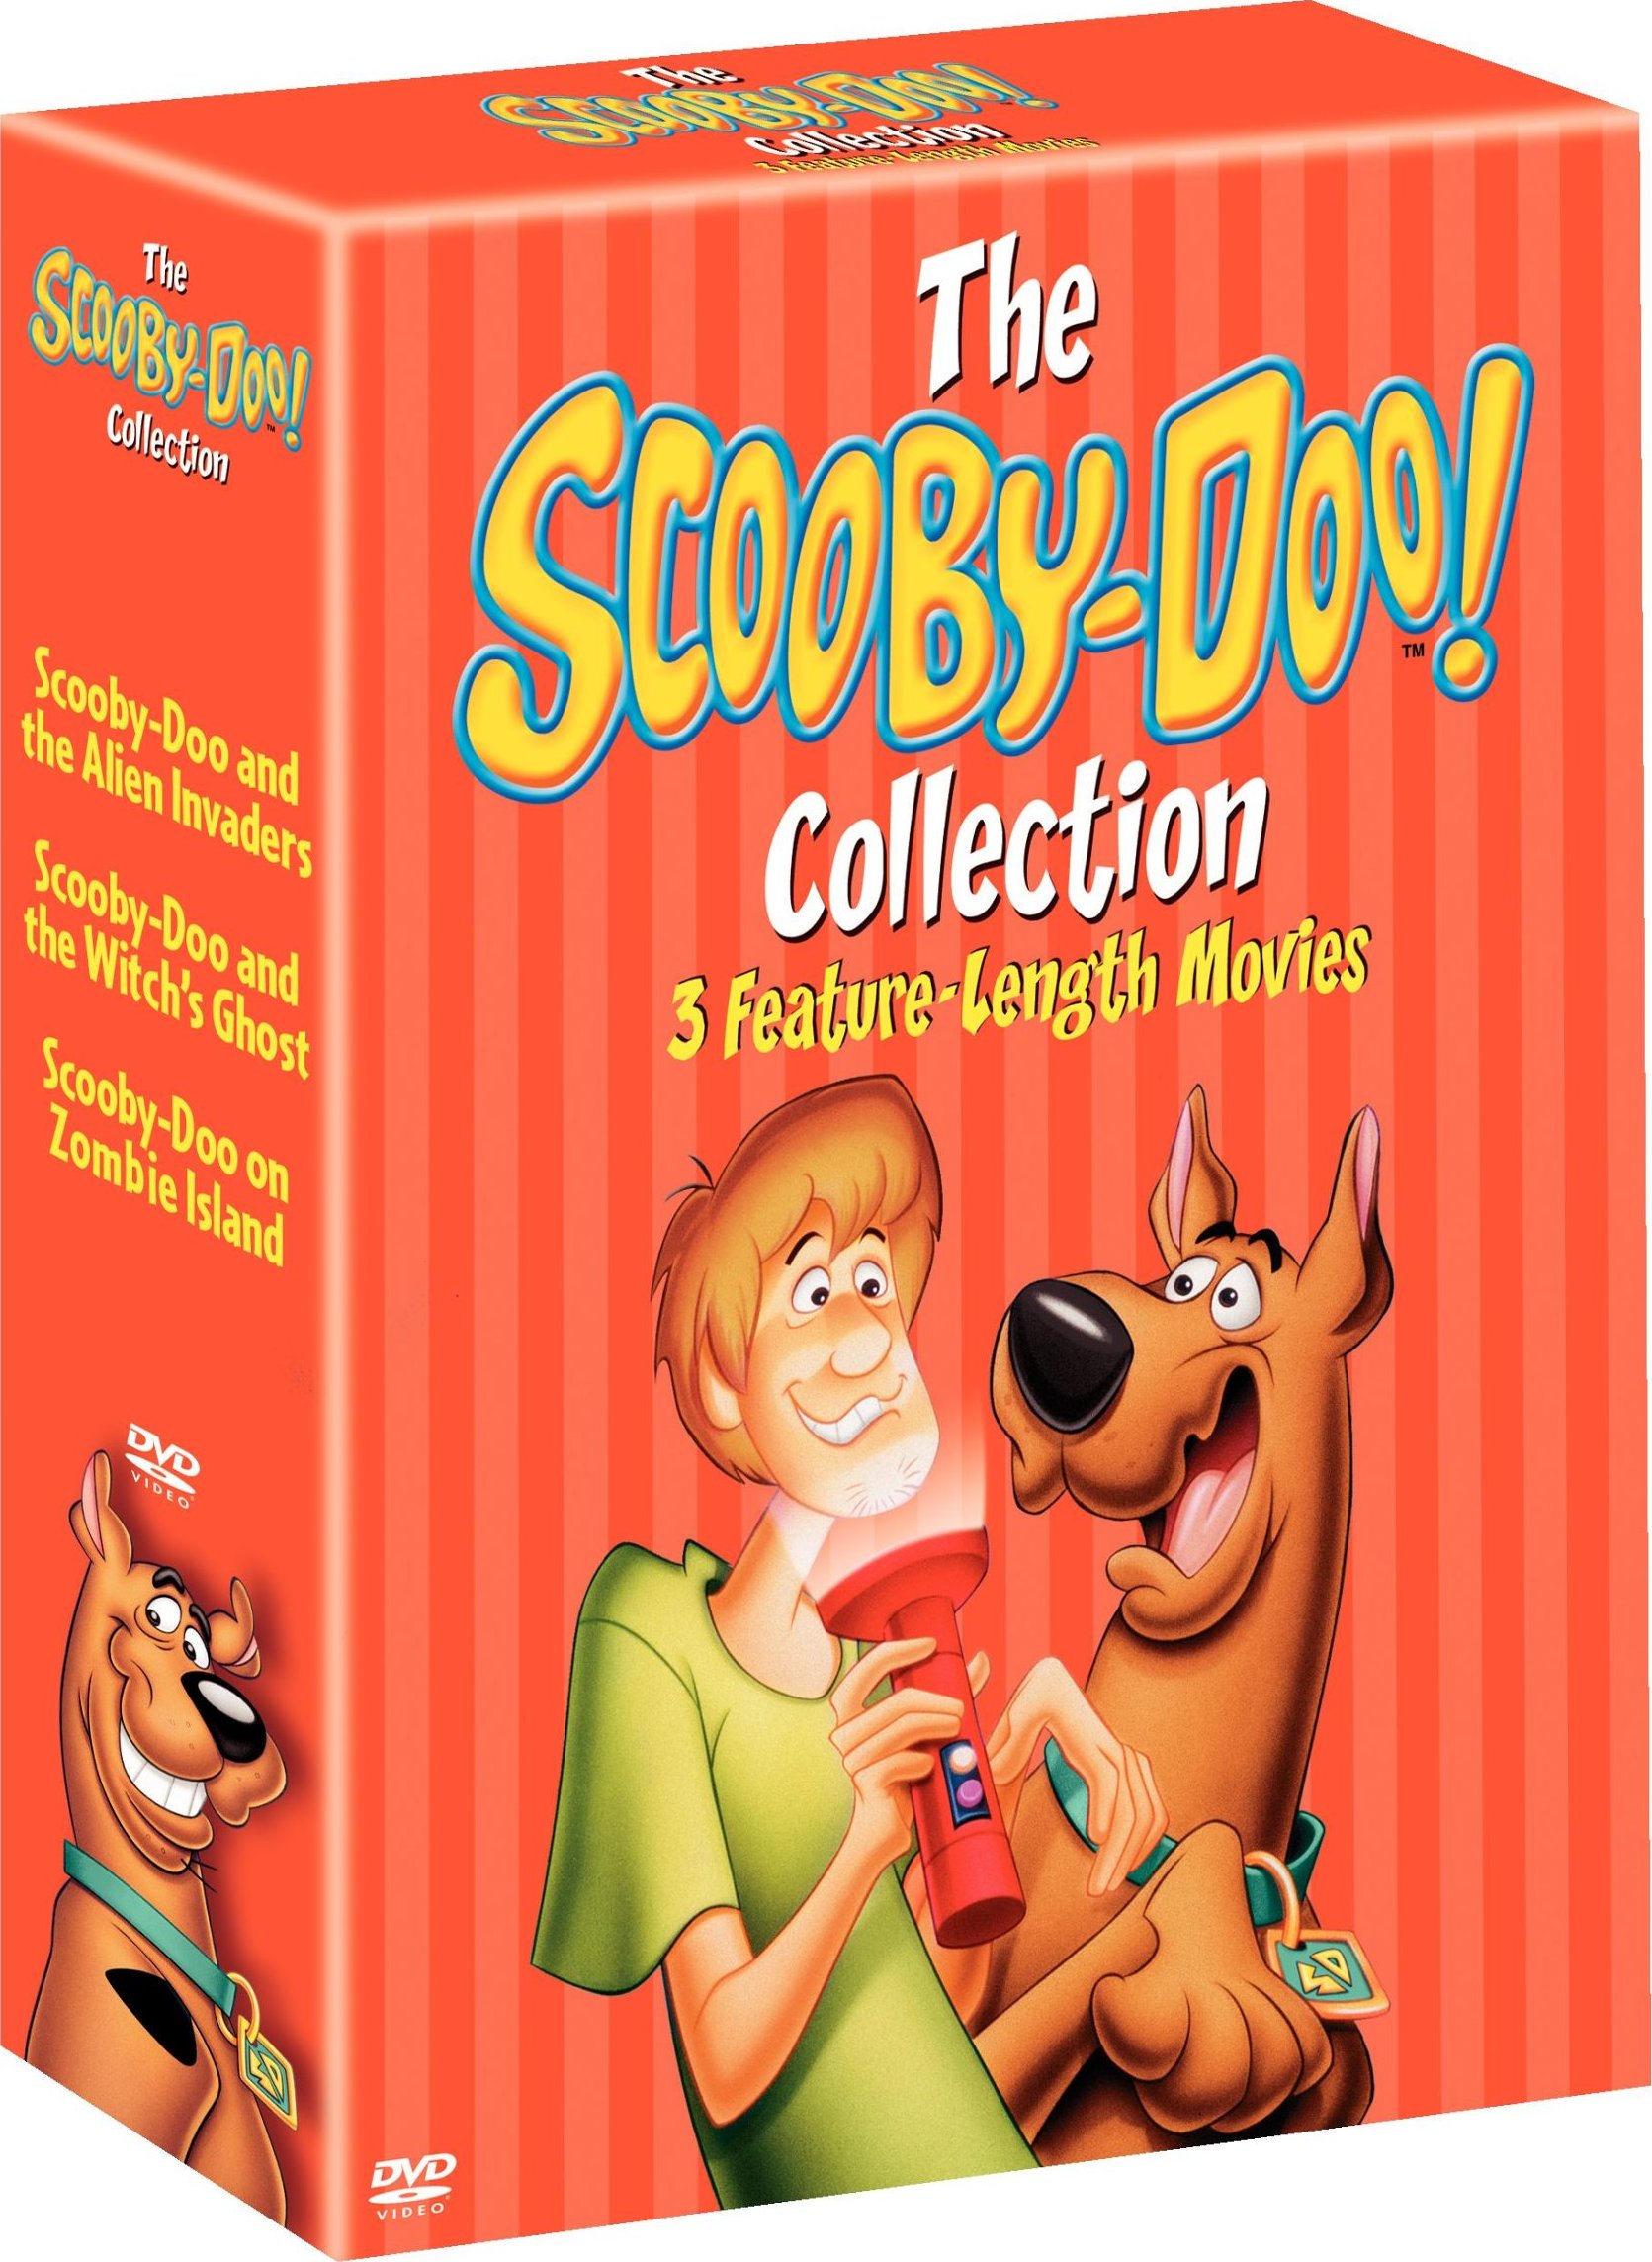 The Scooby-Doo Collection DVD (Scooby-Doo and the Alien Invaders